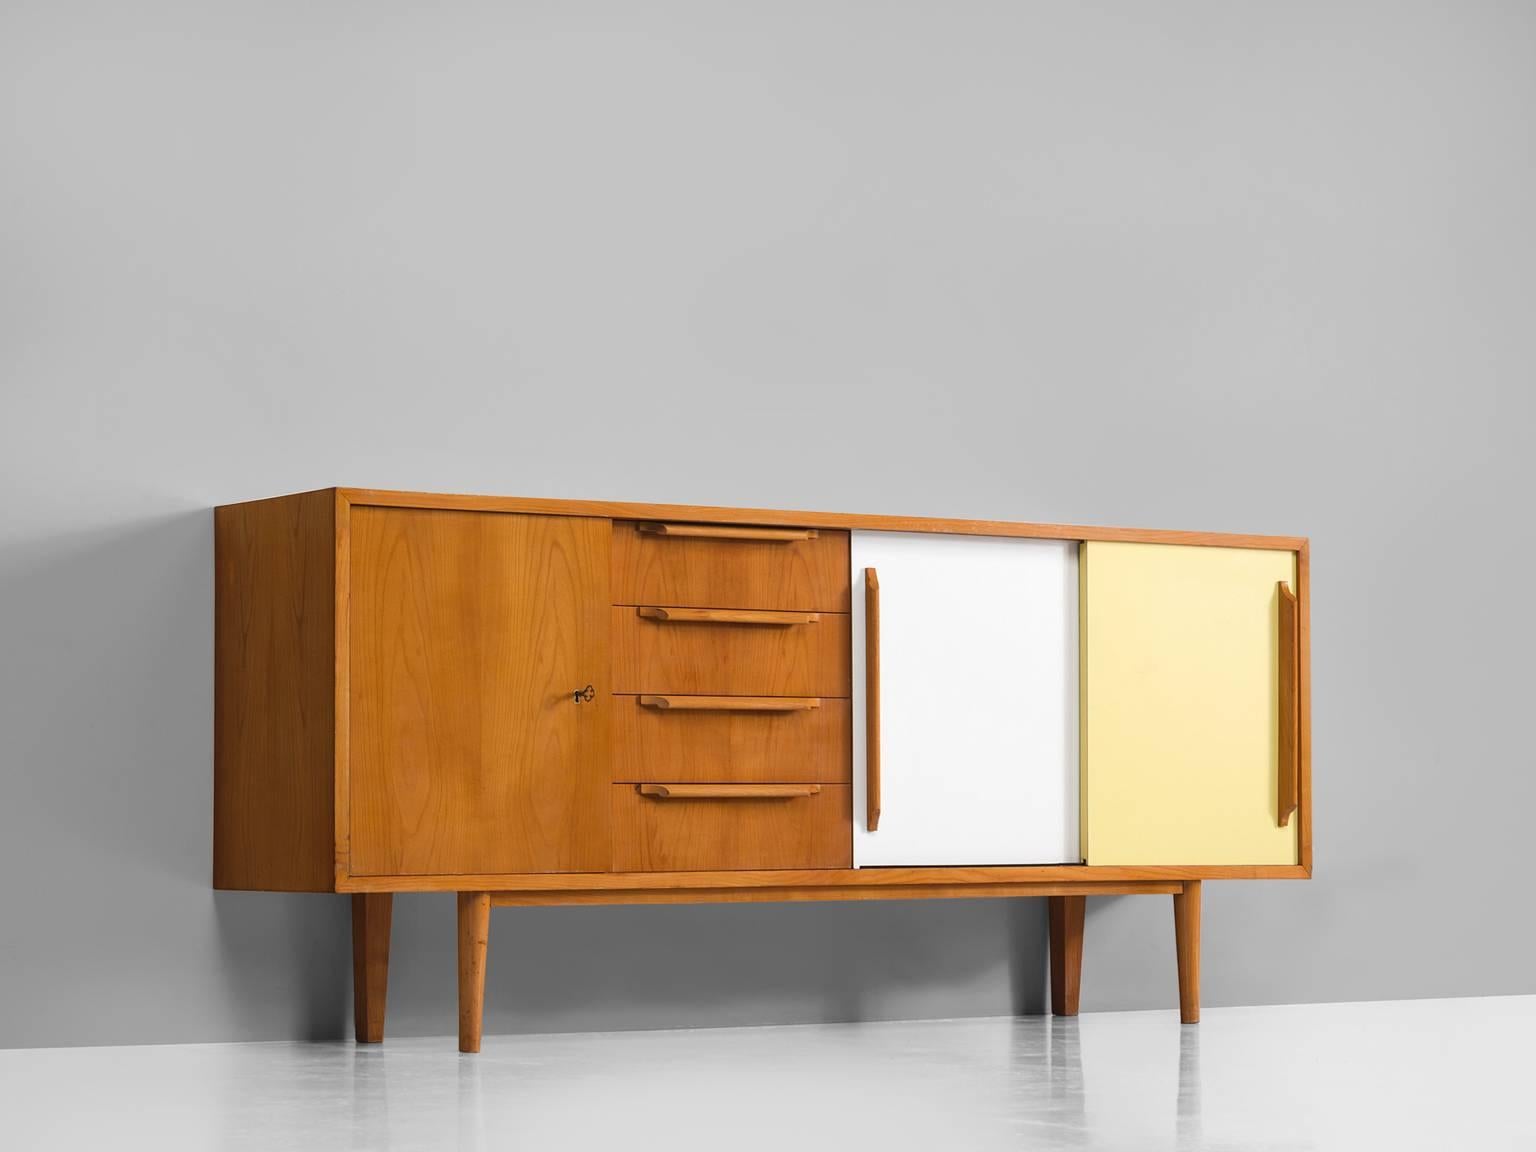 Sideboard for Van den Berghe-Pauvers, wood, formica, 1950s.

This Belgian sideboard is produced by Van den Berghe-Pauvers. Exquisite detail is the black and white blocked front of the shelves that form a strong graphic pattern. The blond cherry